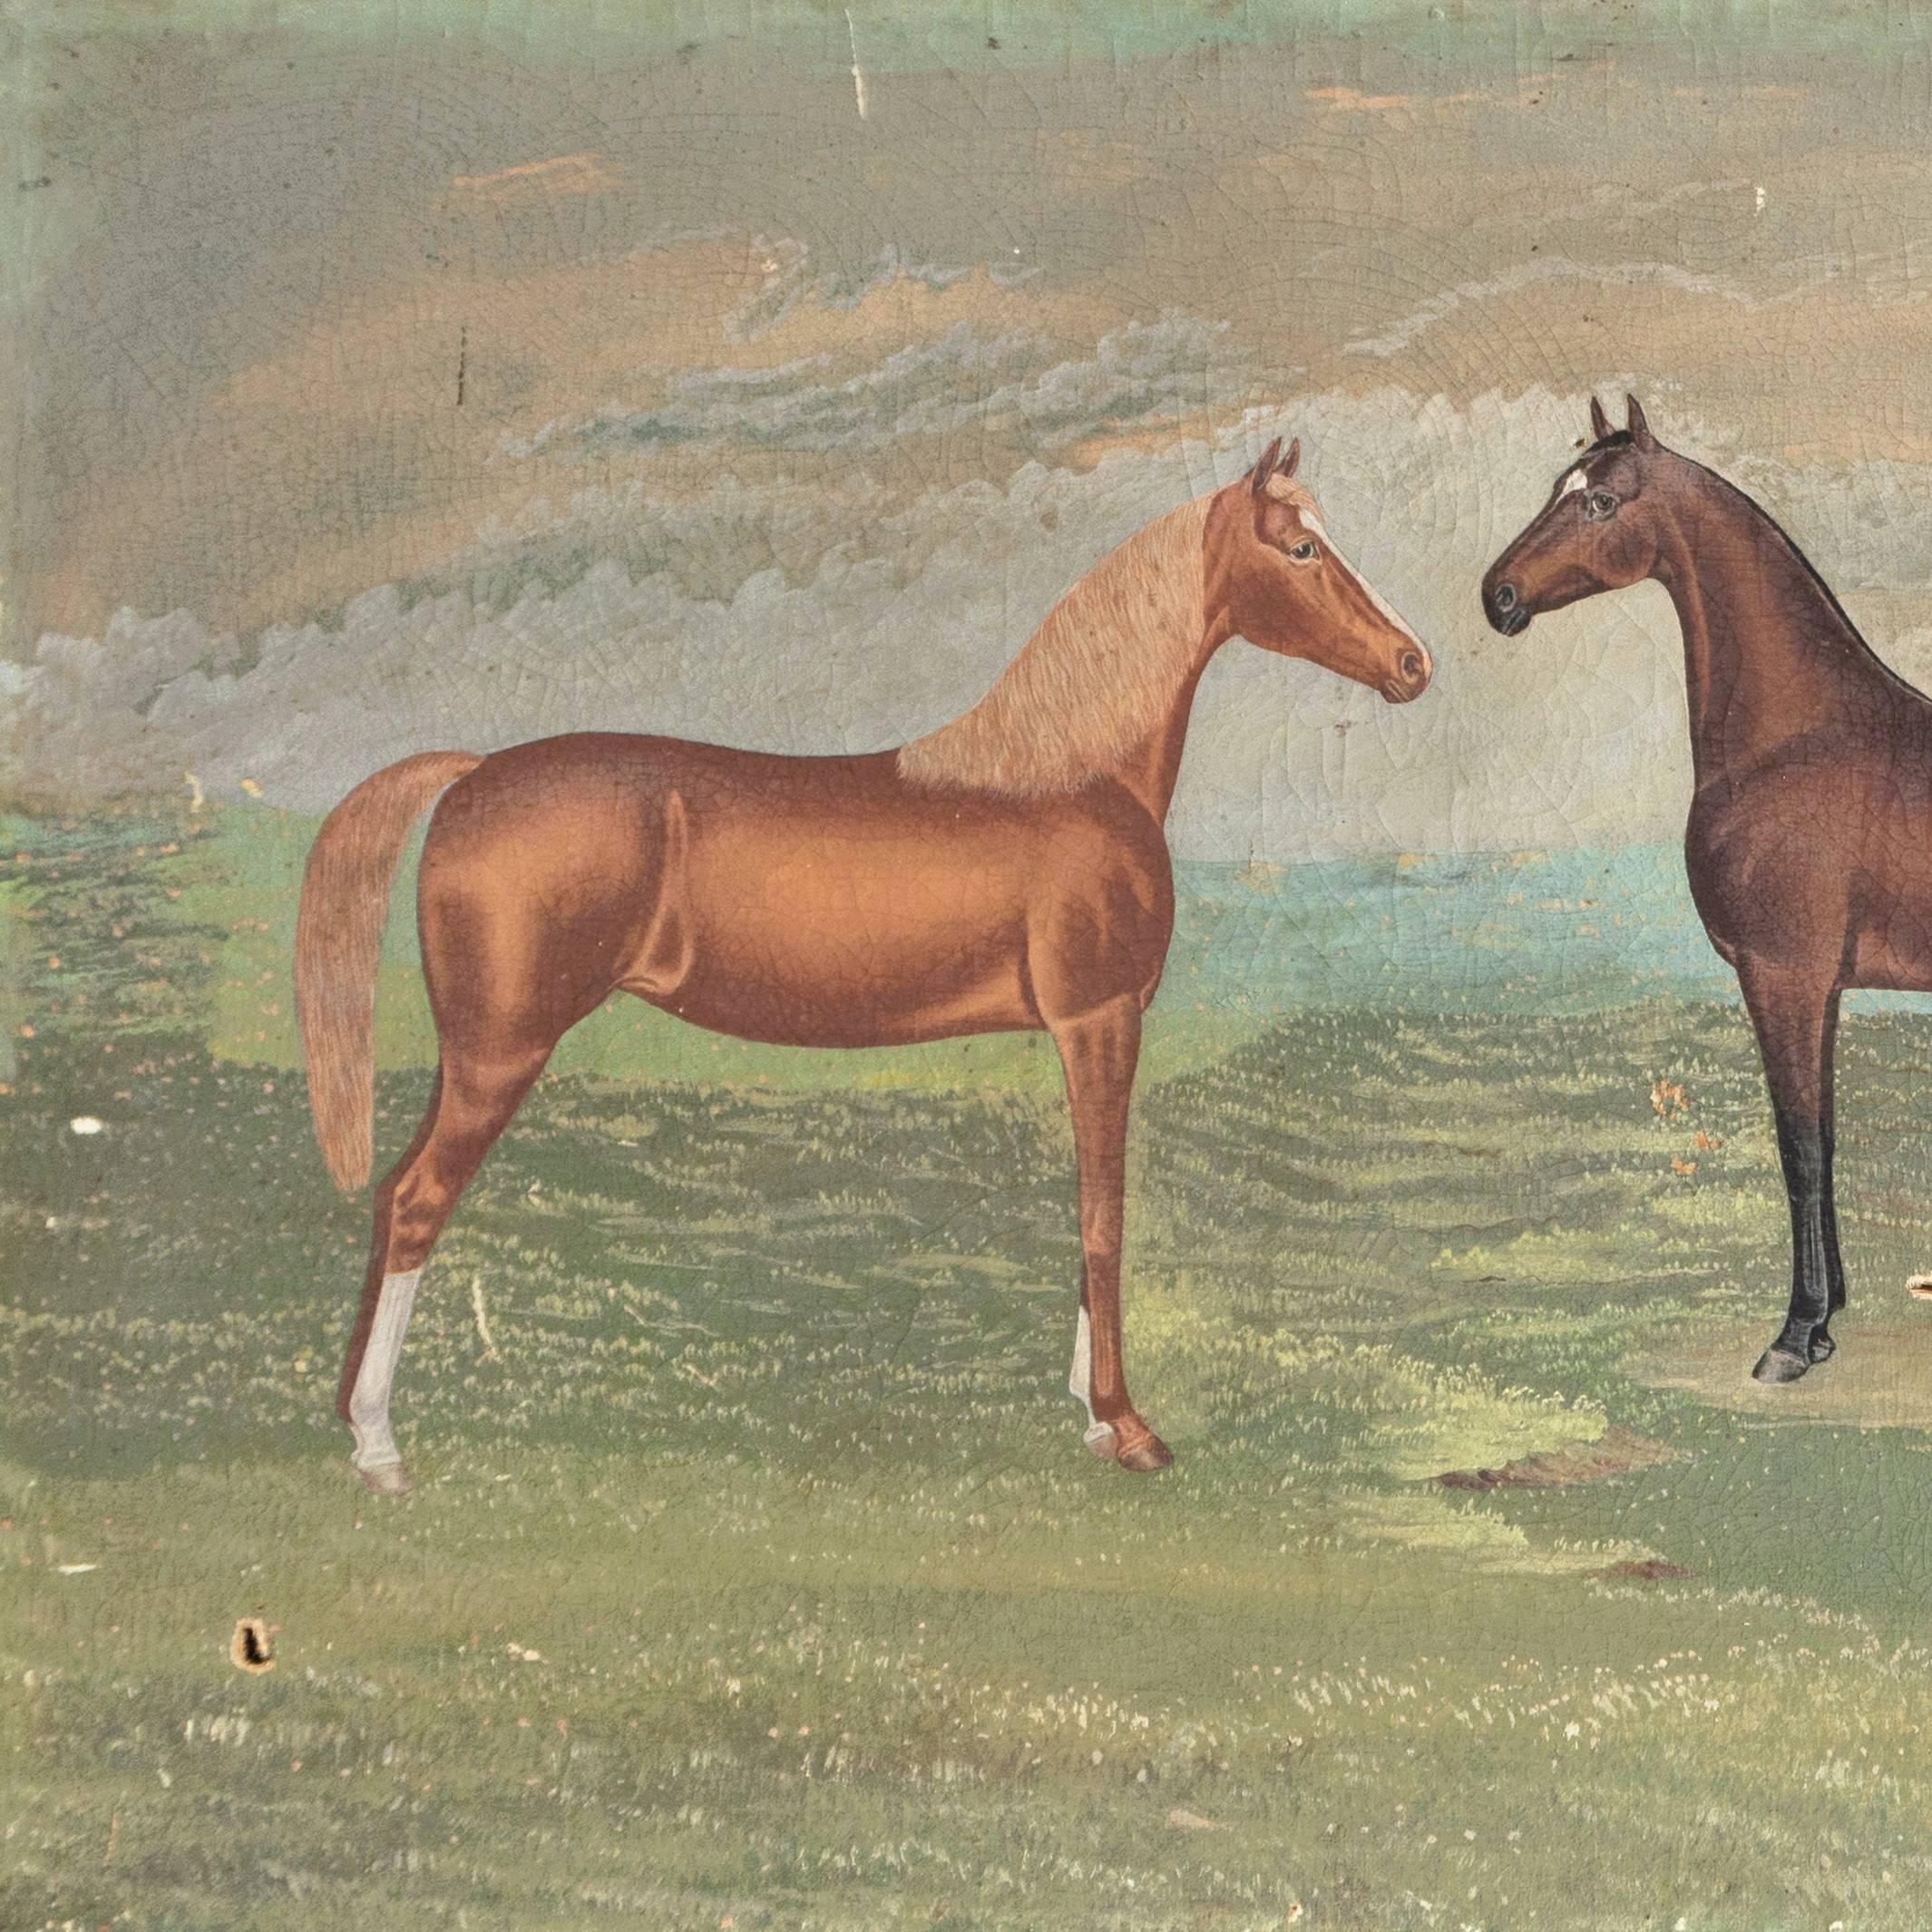 Signed lower right, 'Frost' and dated 1912; additionally, inscribed lower center 'Bred and owned by Len A. Saunders, Bolckow, MO'.

An elegant, early-twentieth century equine portrait showing five horses posed in a rural Missouri landscape.
 